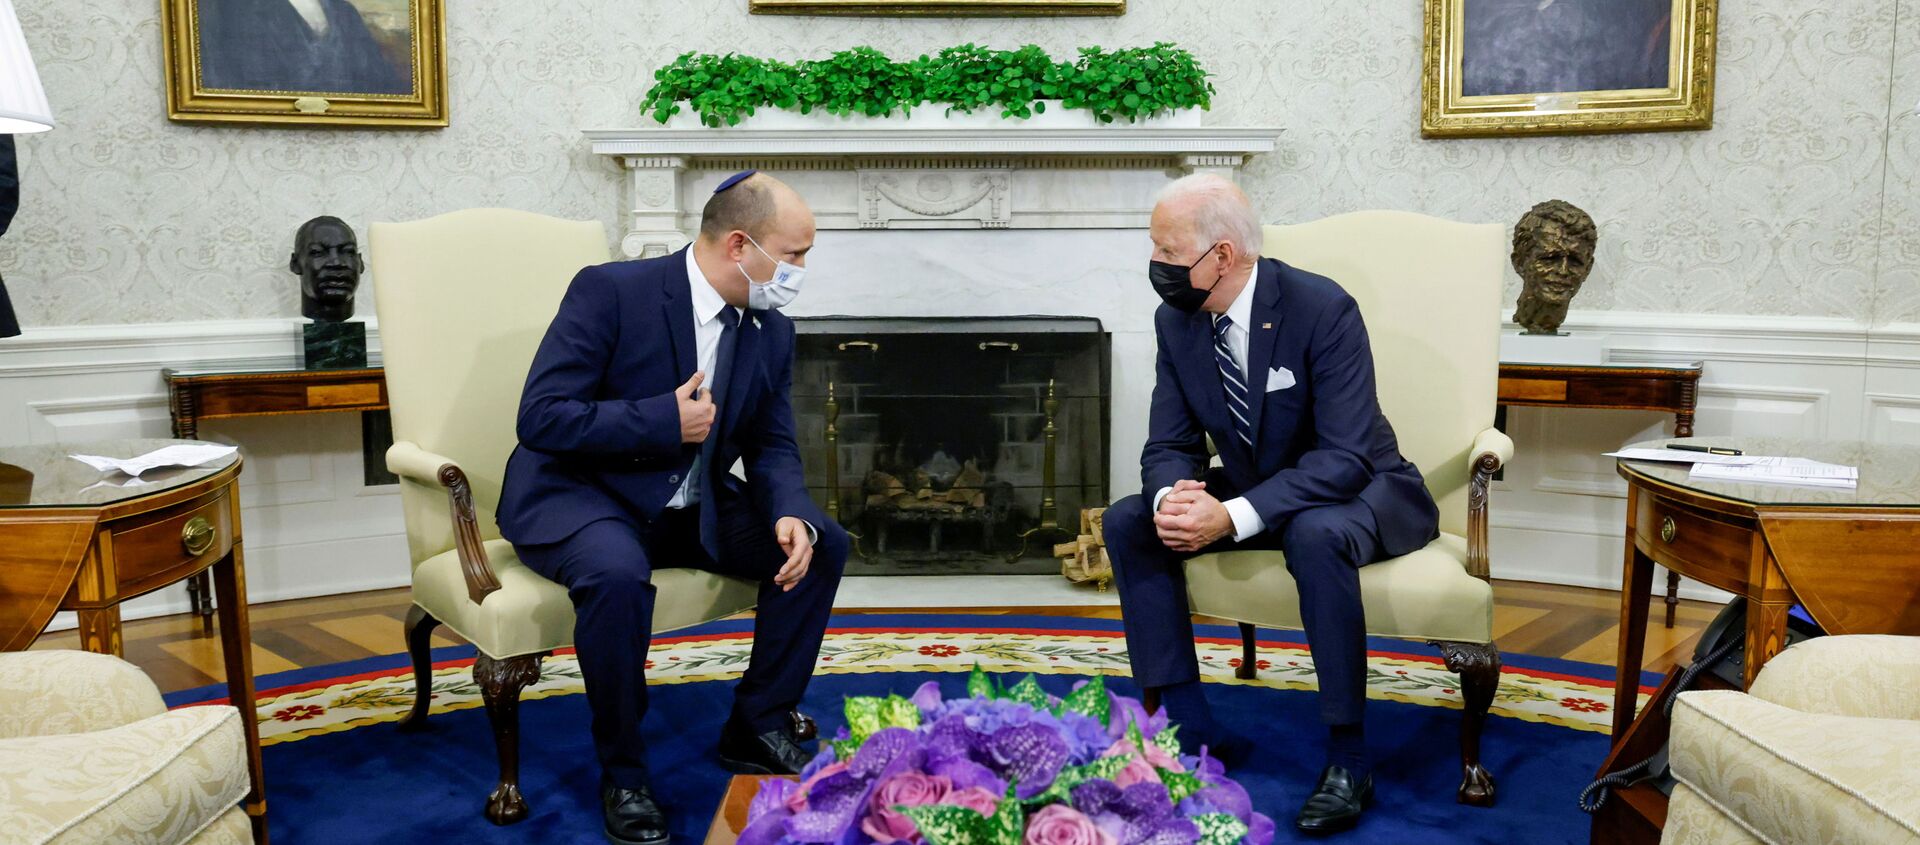 U.S. President Joe Biden and Israel's Prime Minister Naftali Bennett chat during a meeting in the Oval Office at the White House in Washington, U.S. August 27, 2021. - Sputnik International, 1920, 28.08.2021